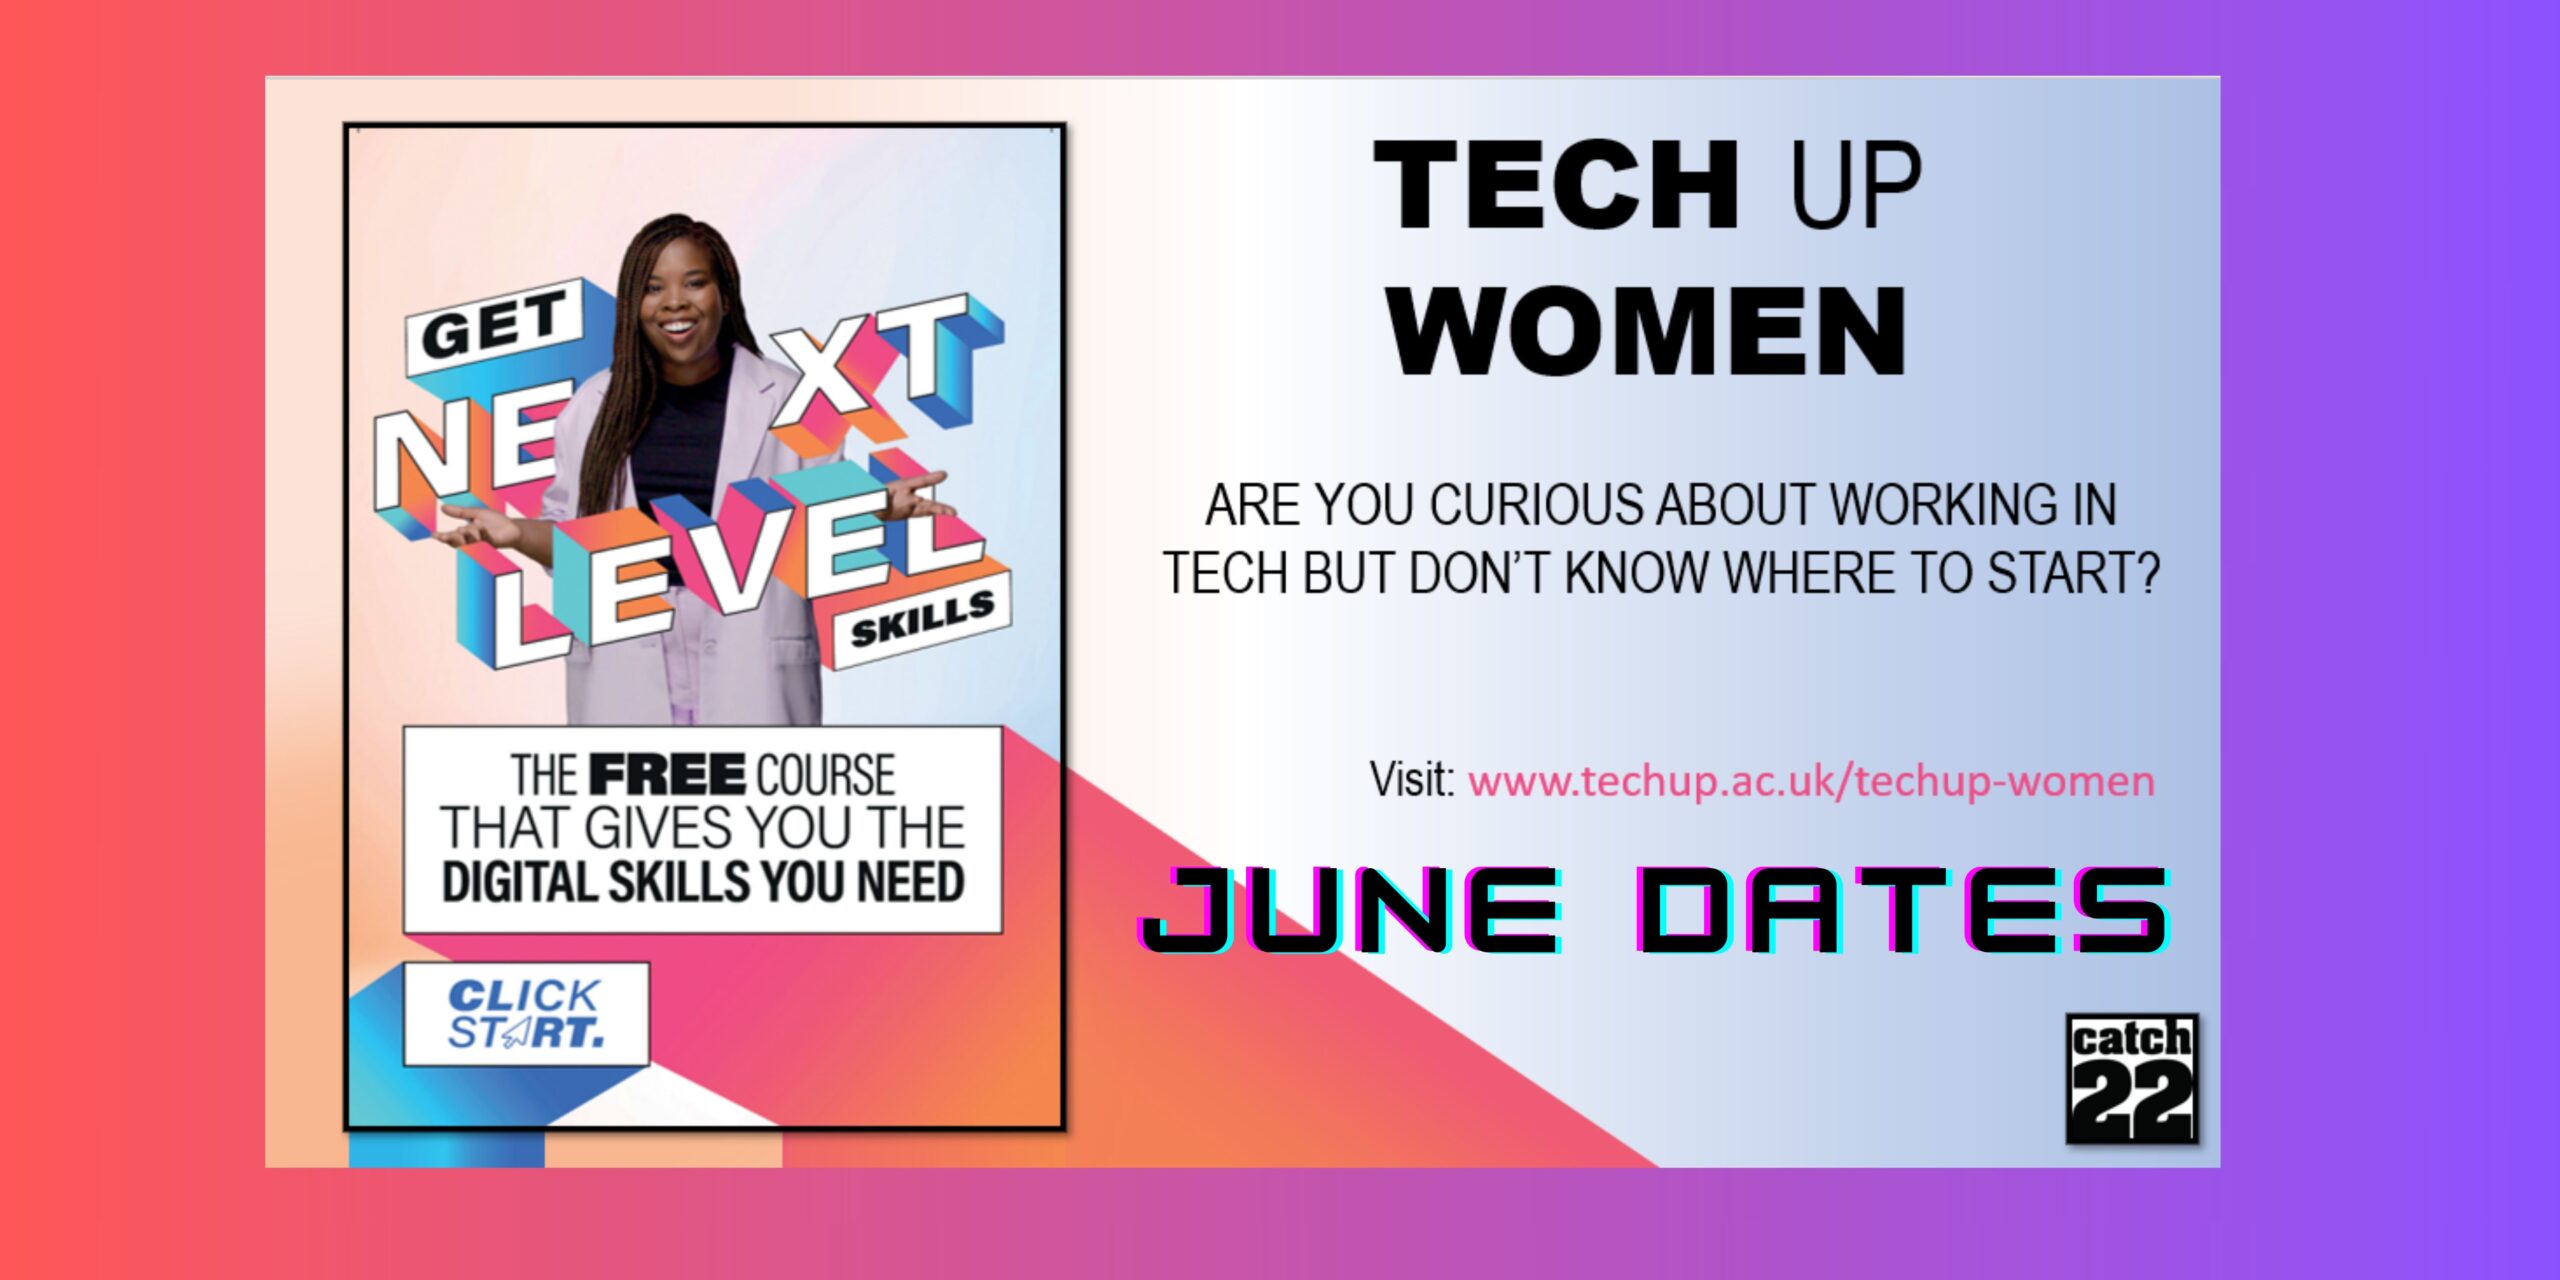 Tech up women, the free course that gives you the digital skills you need. June dates.